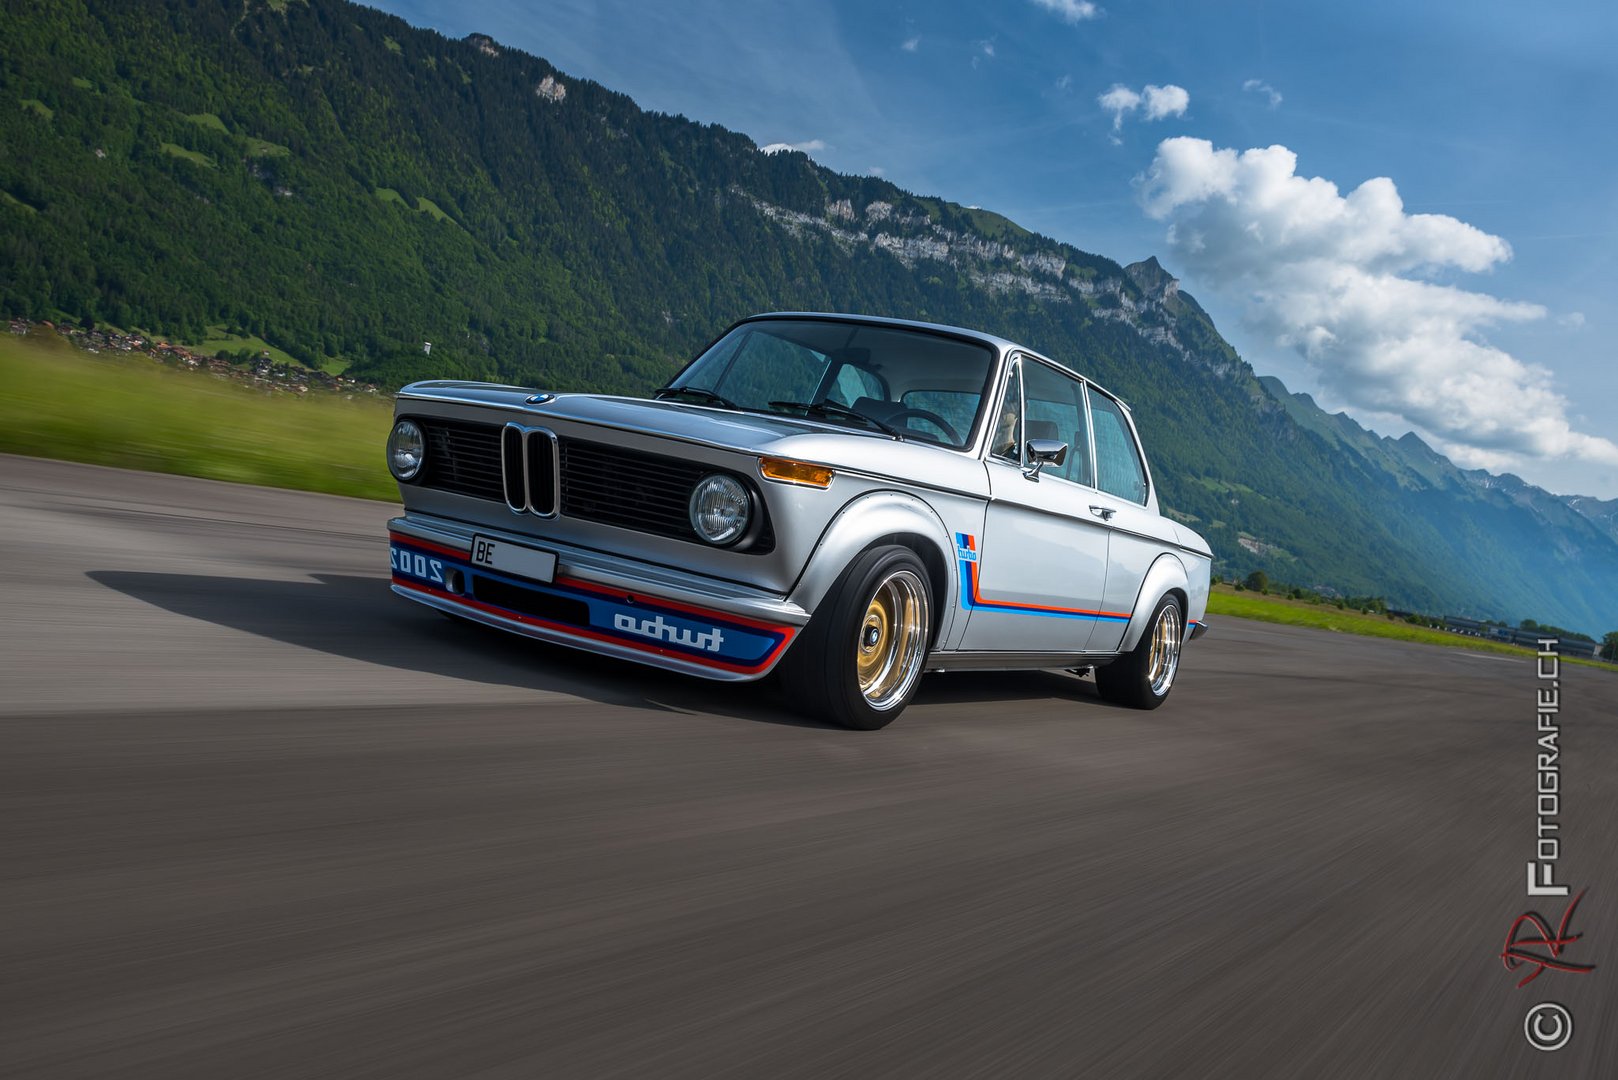 BMW 2002 Turbo in Action